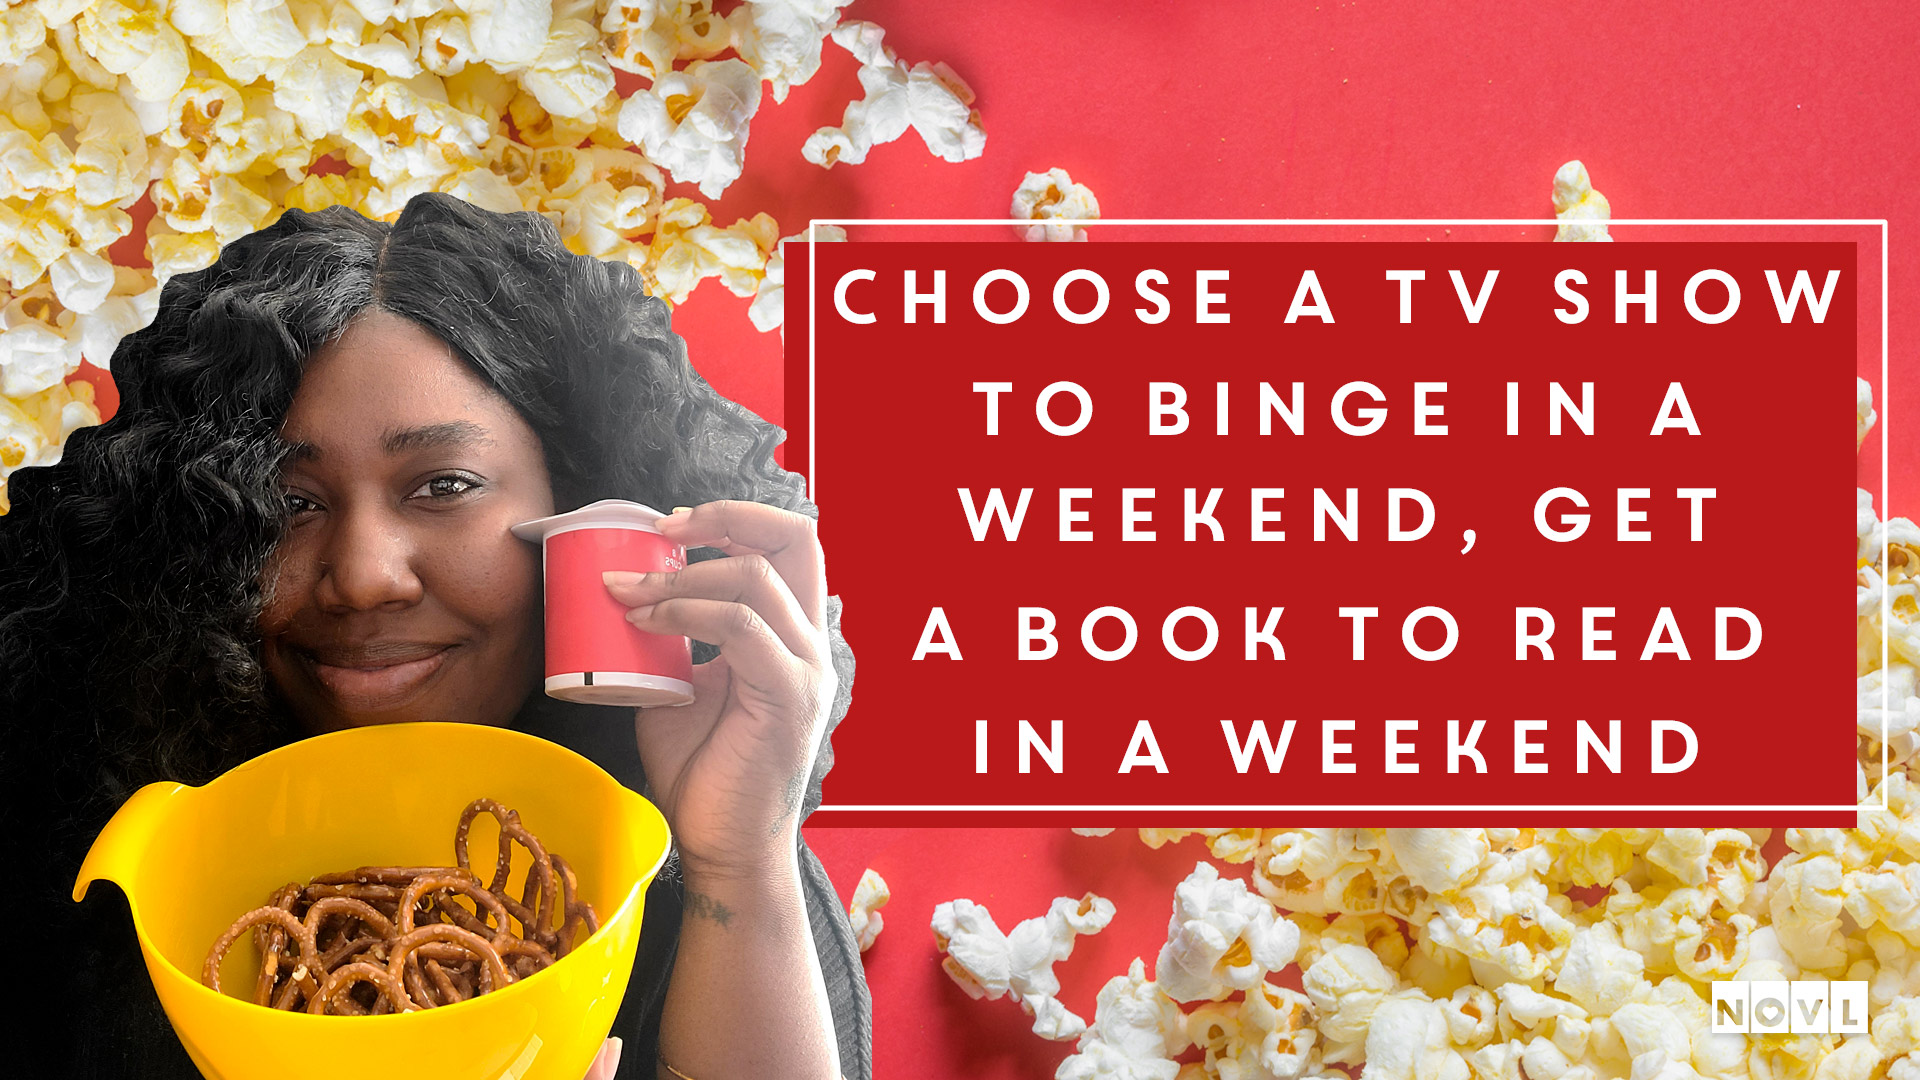 The NOVL Blog, Featured Image for Article: Choose a TV Show to Binge in a Weekend, Get a Book To Read in a Weekend